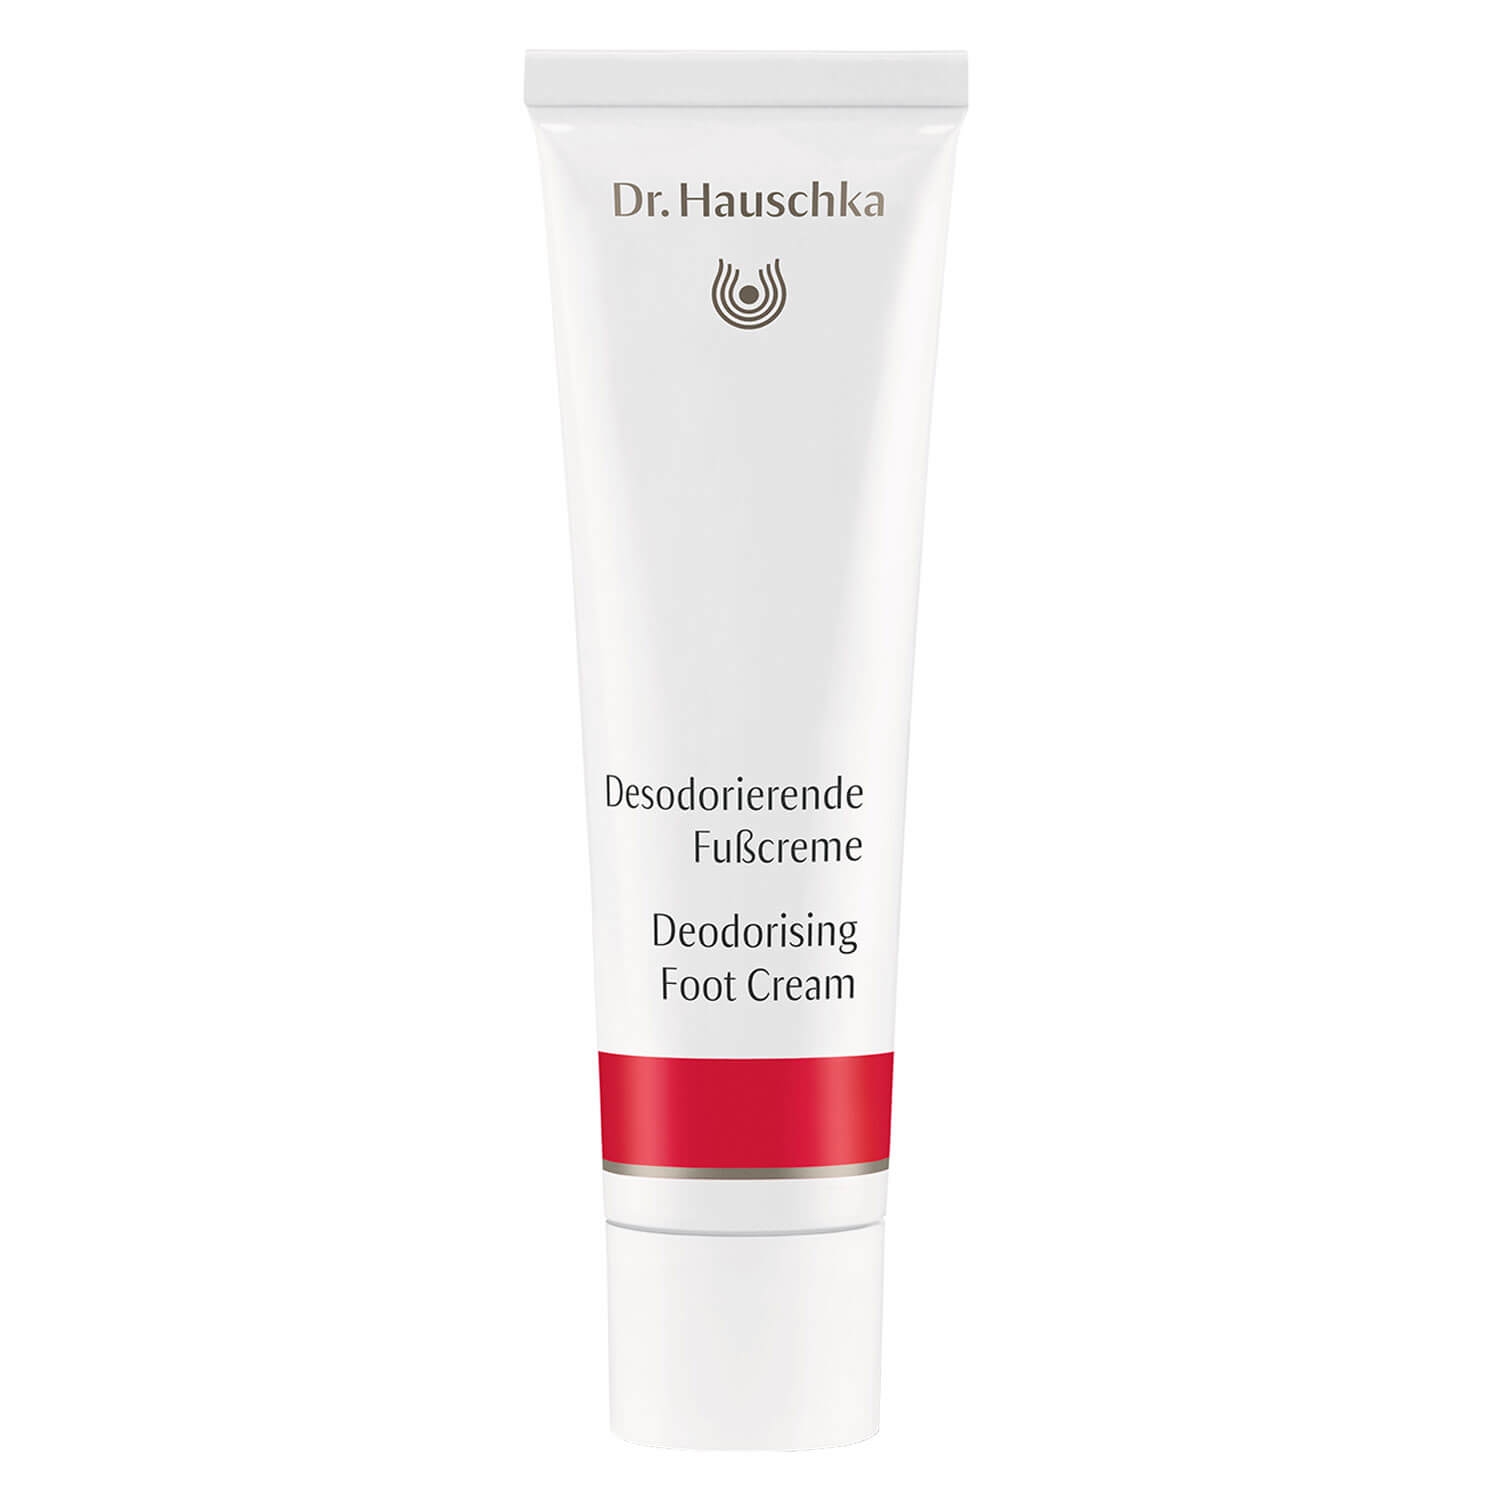 Product image from Dr. Hauschka Desodorierende Fusscreme